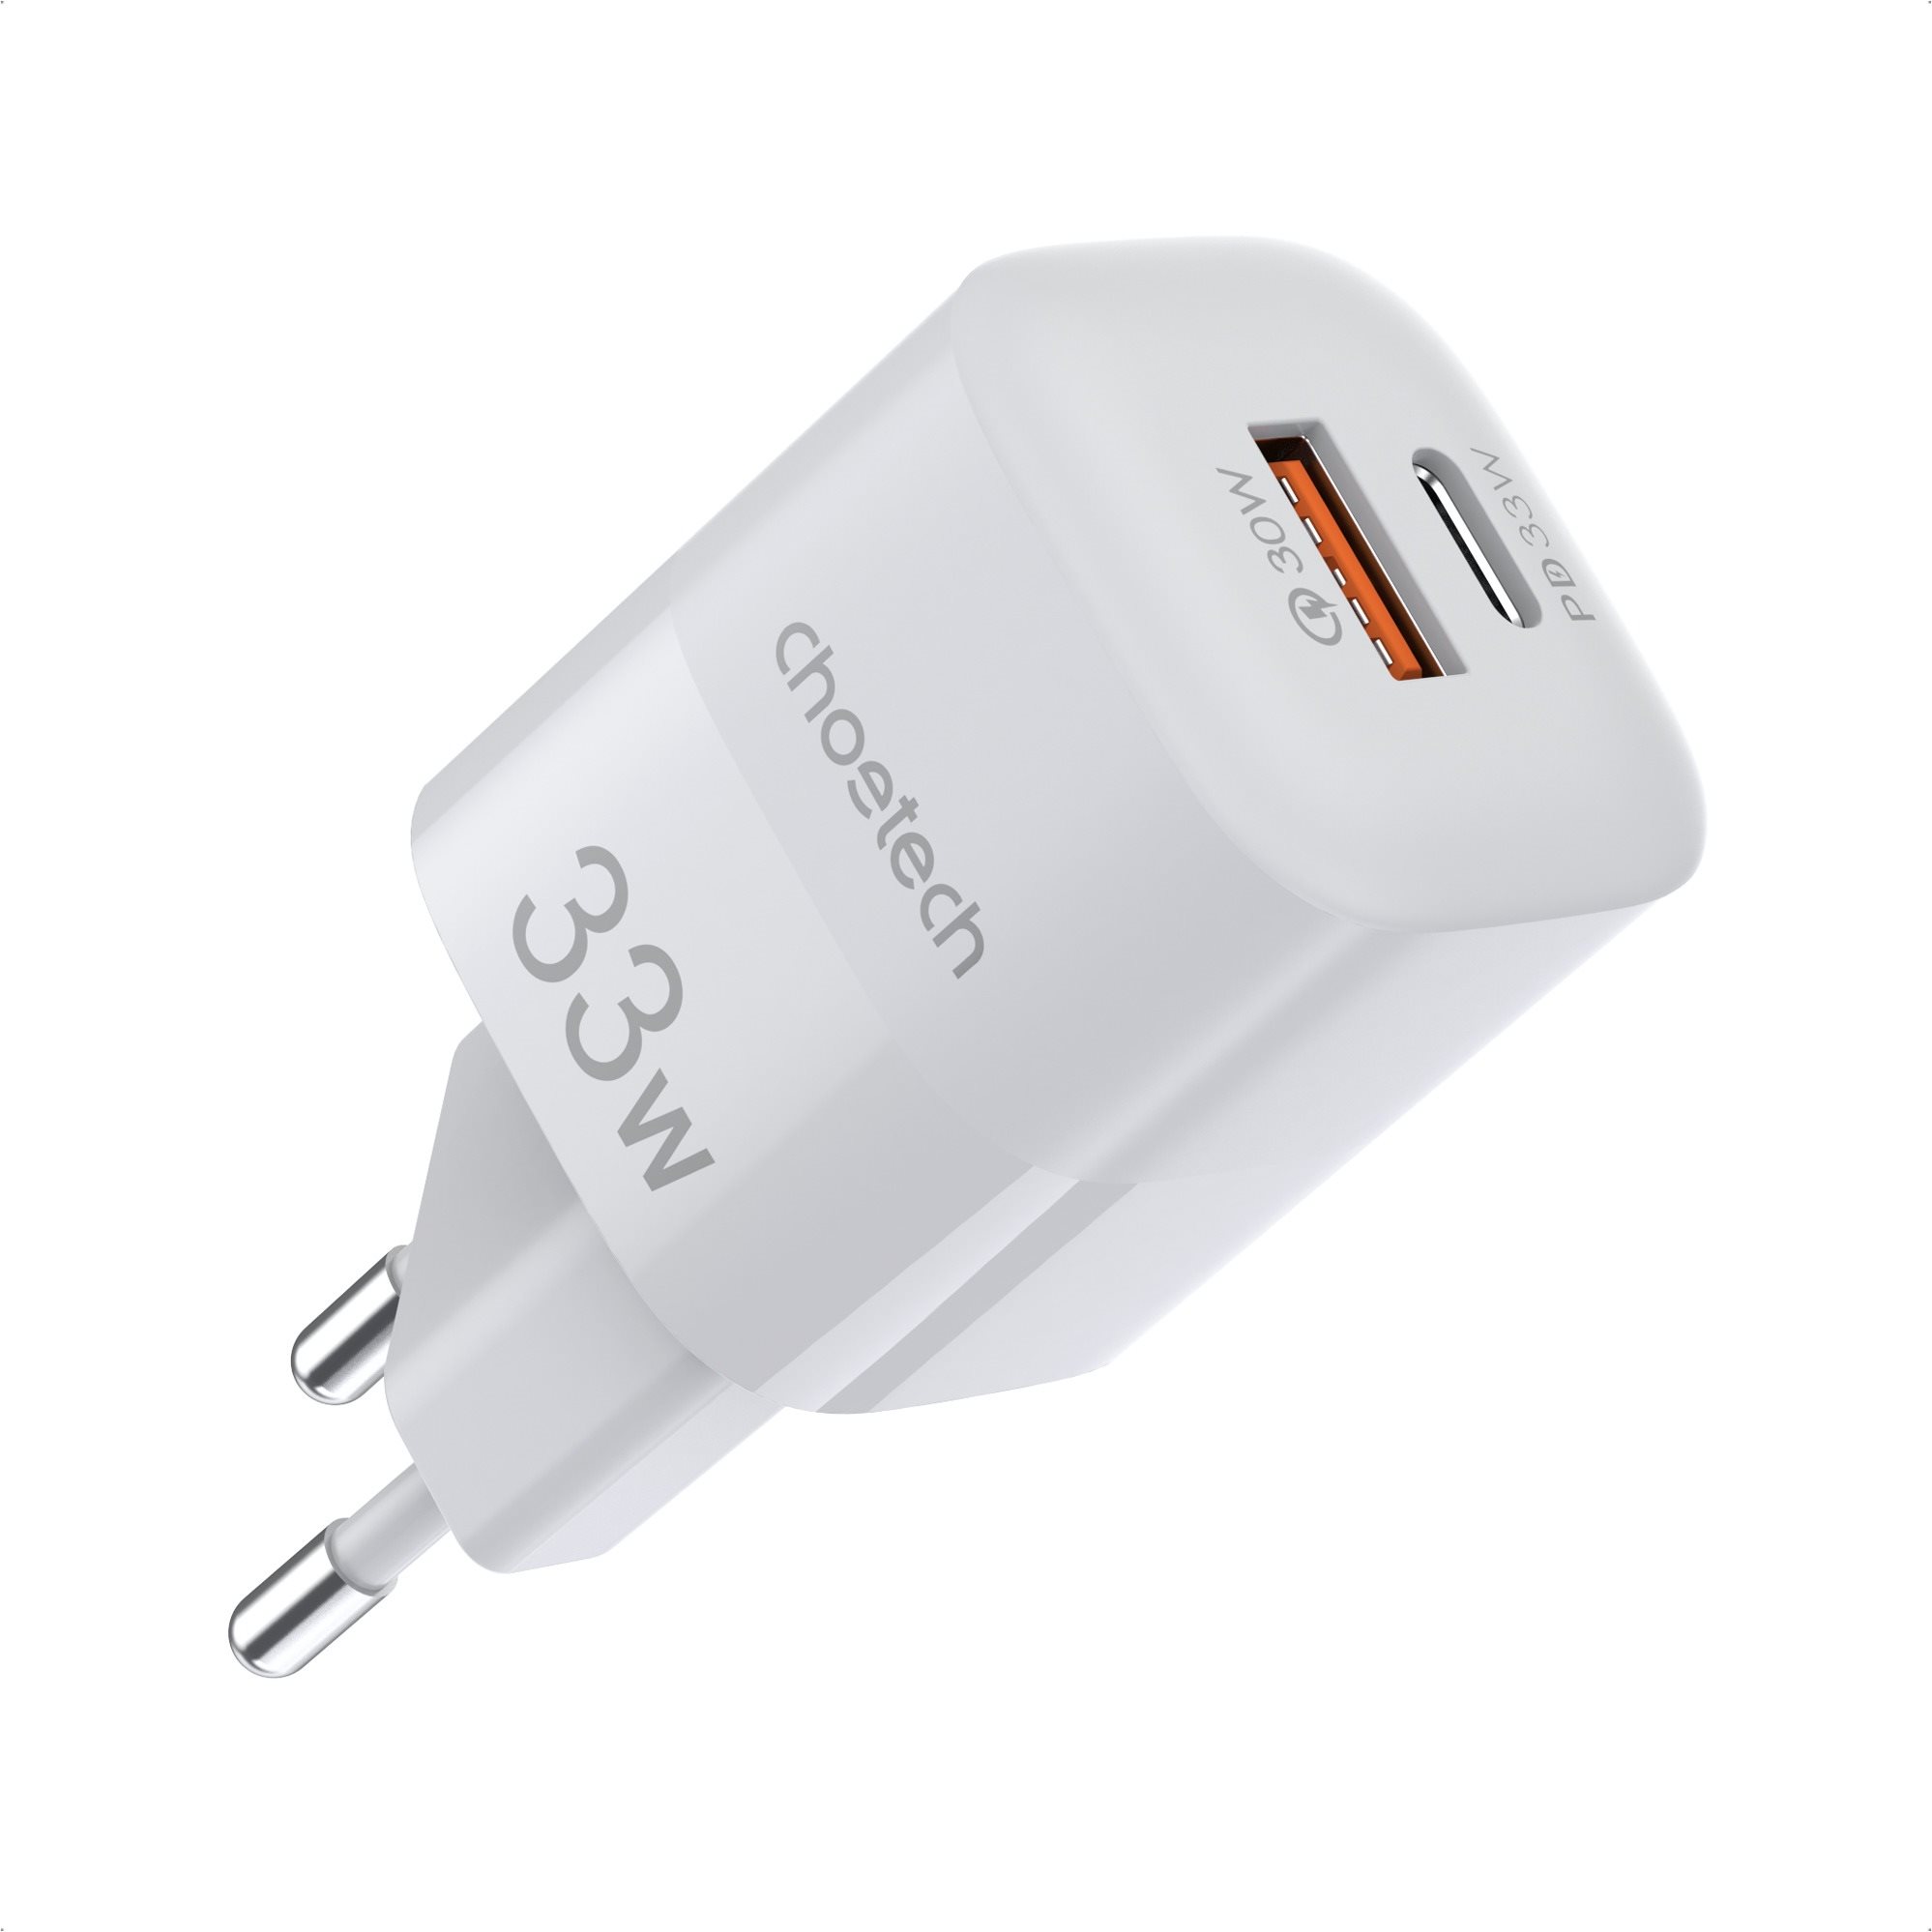 ChoeTech PD33w A+C Wall Charger - White